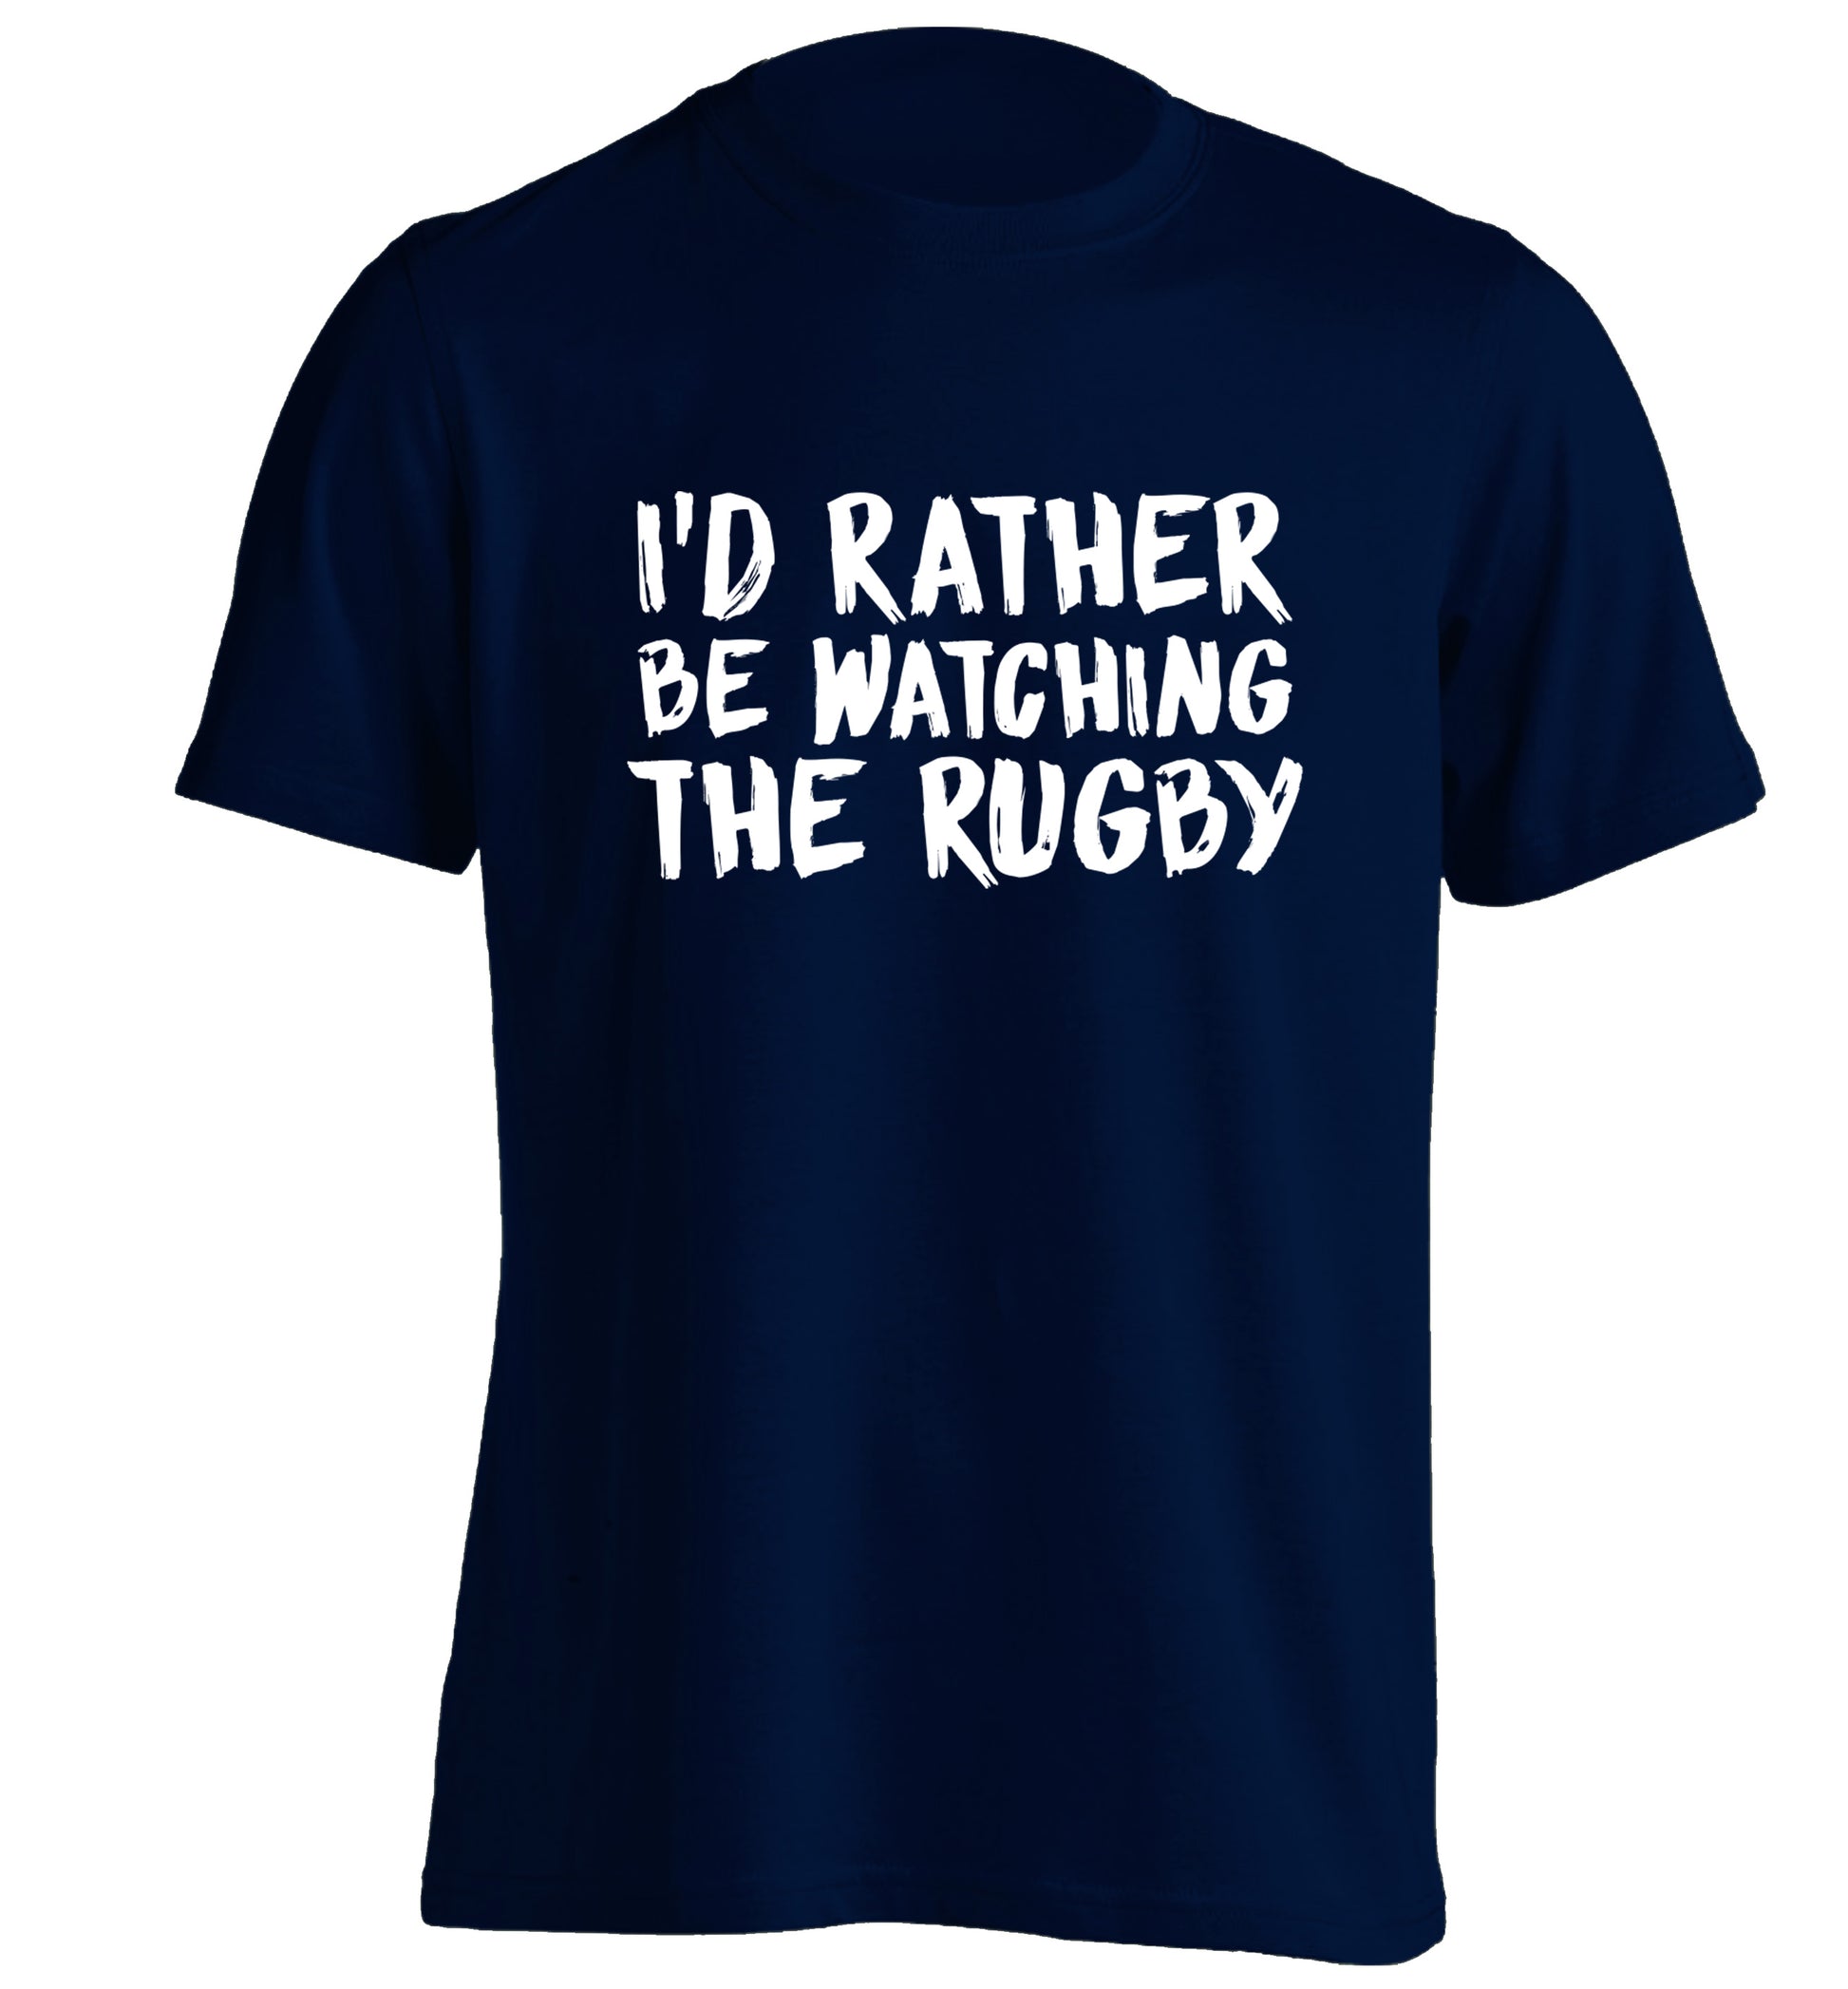 I'd rather be watching the rugby adults unisex navy Tshirt 2XL